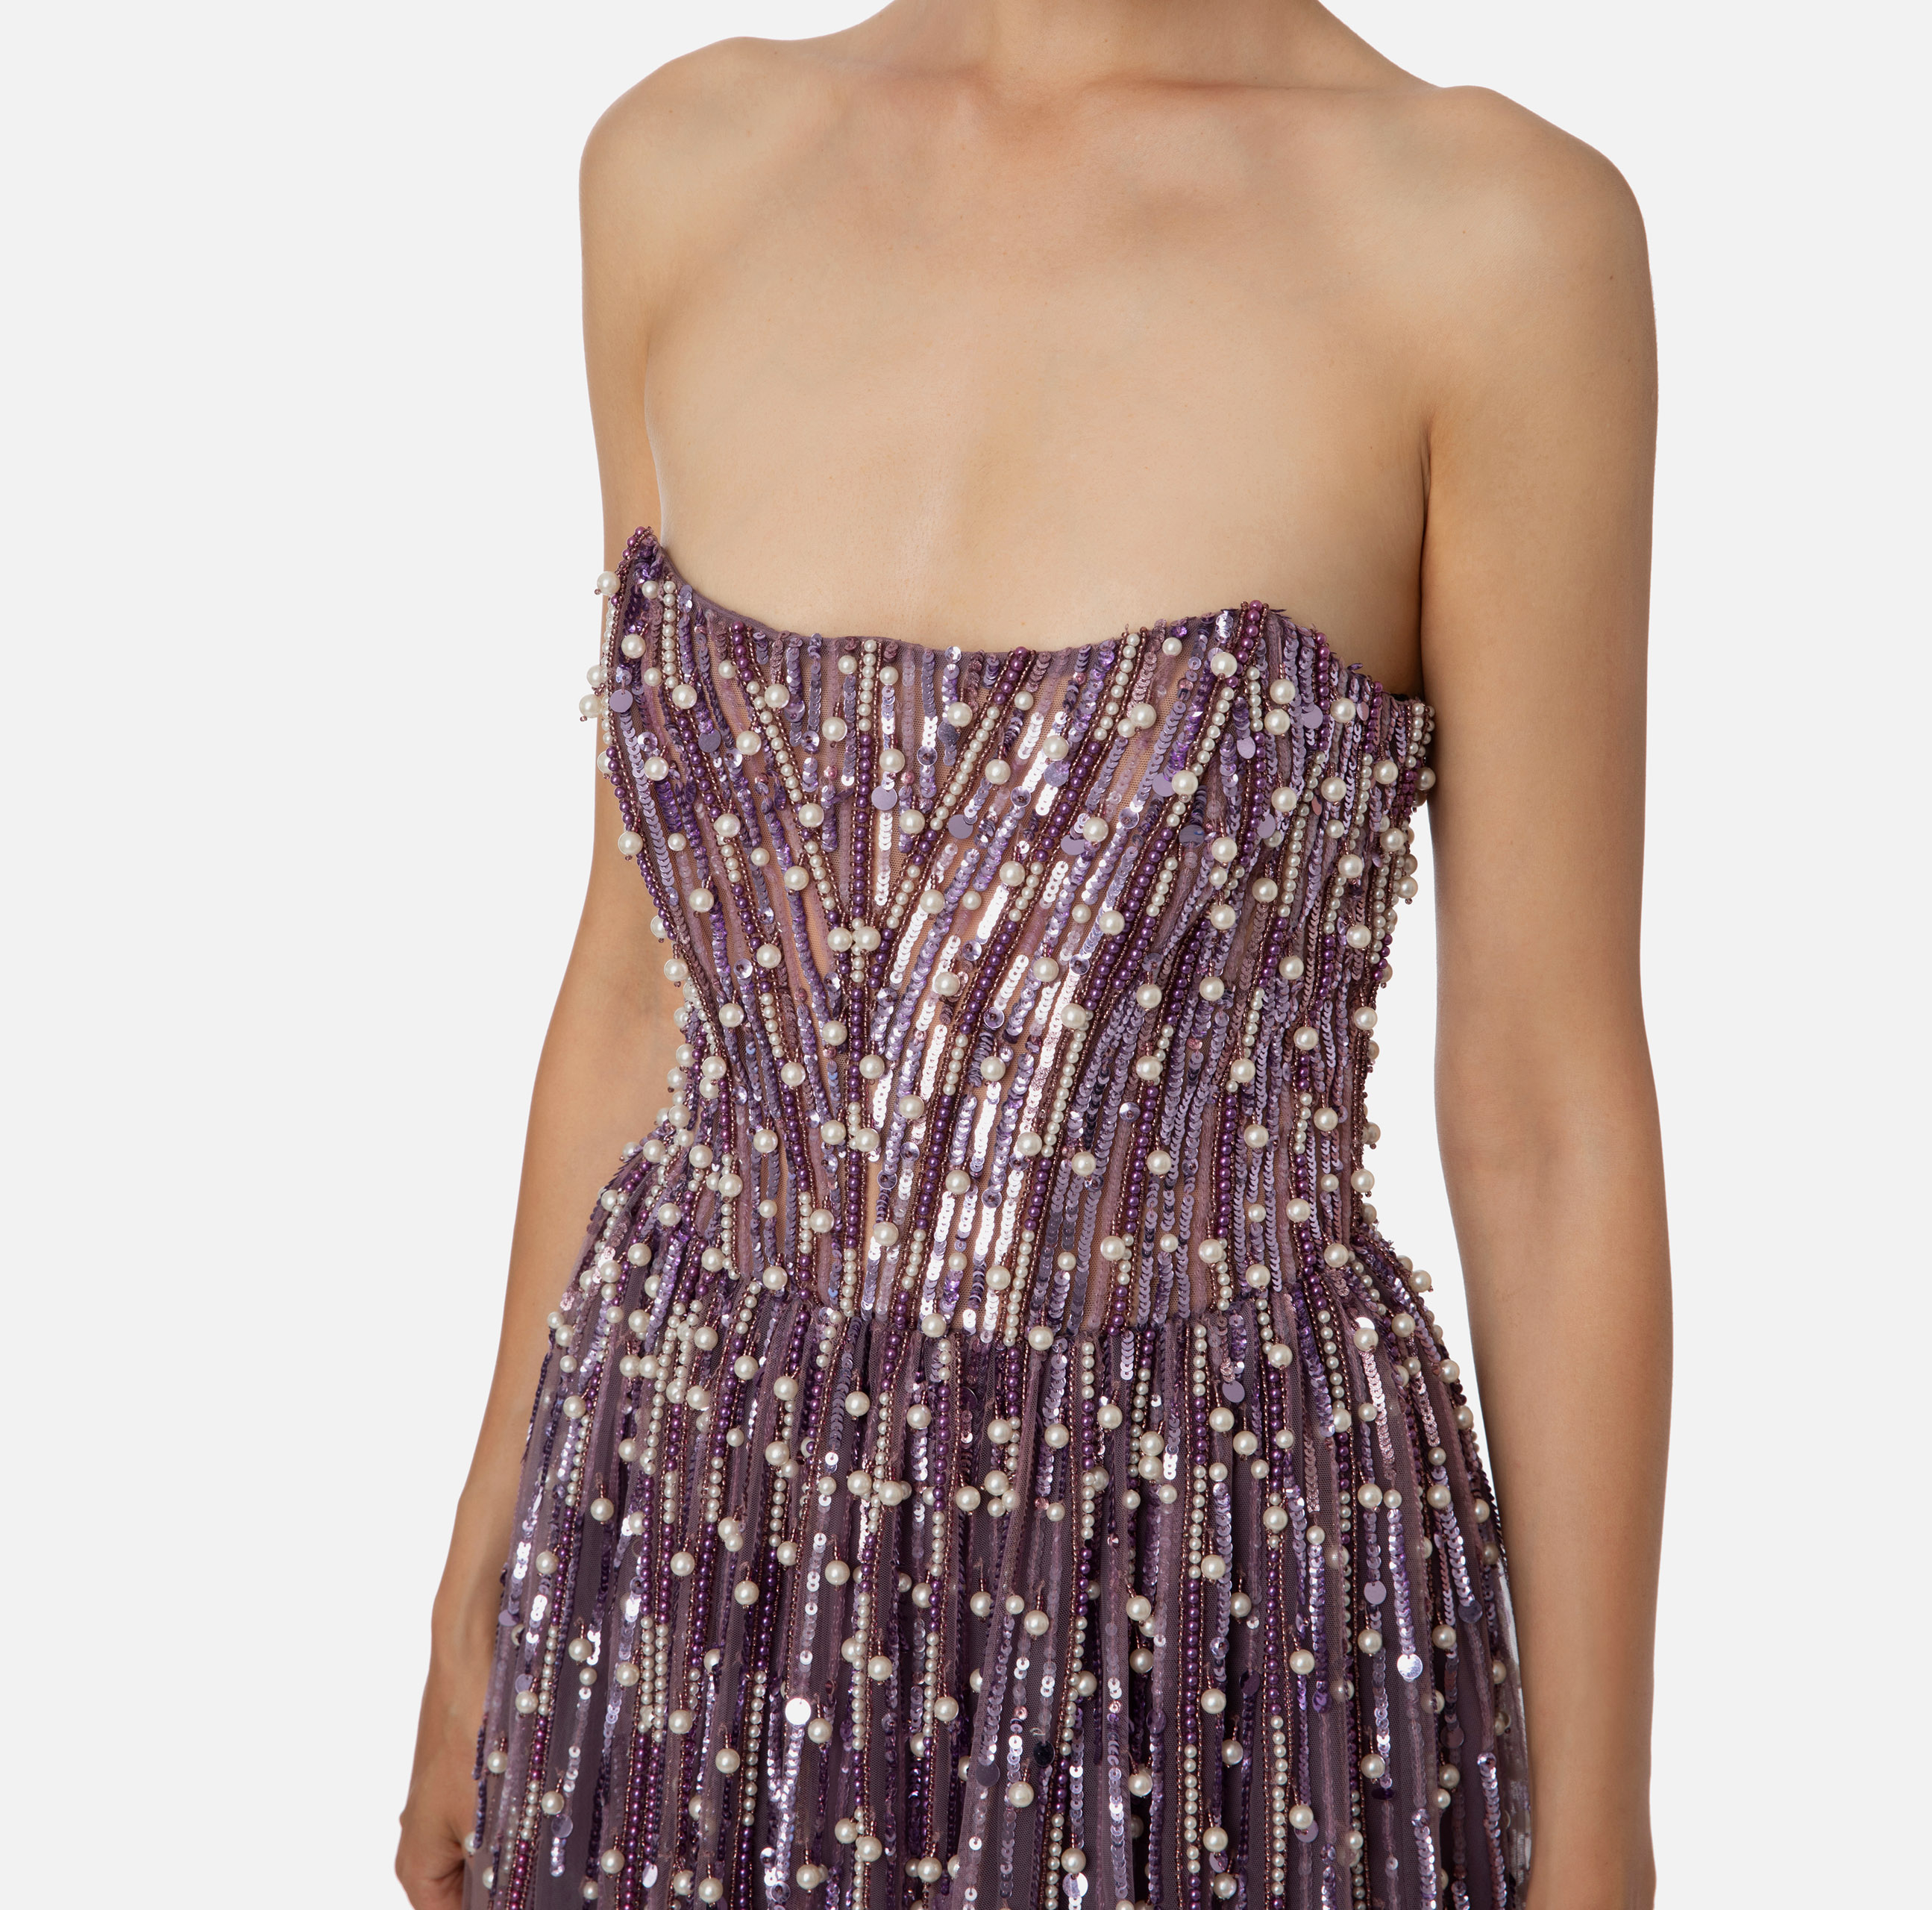 Red Carpet dress with sequins and pearls - Elisabetta Franchi